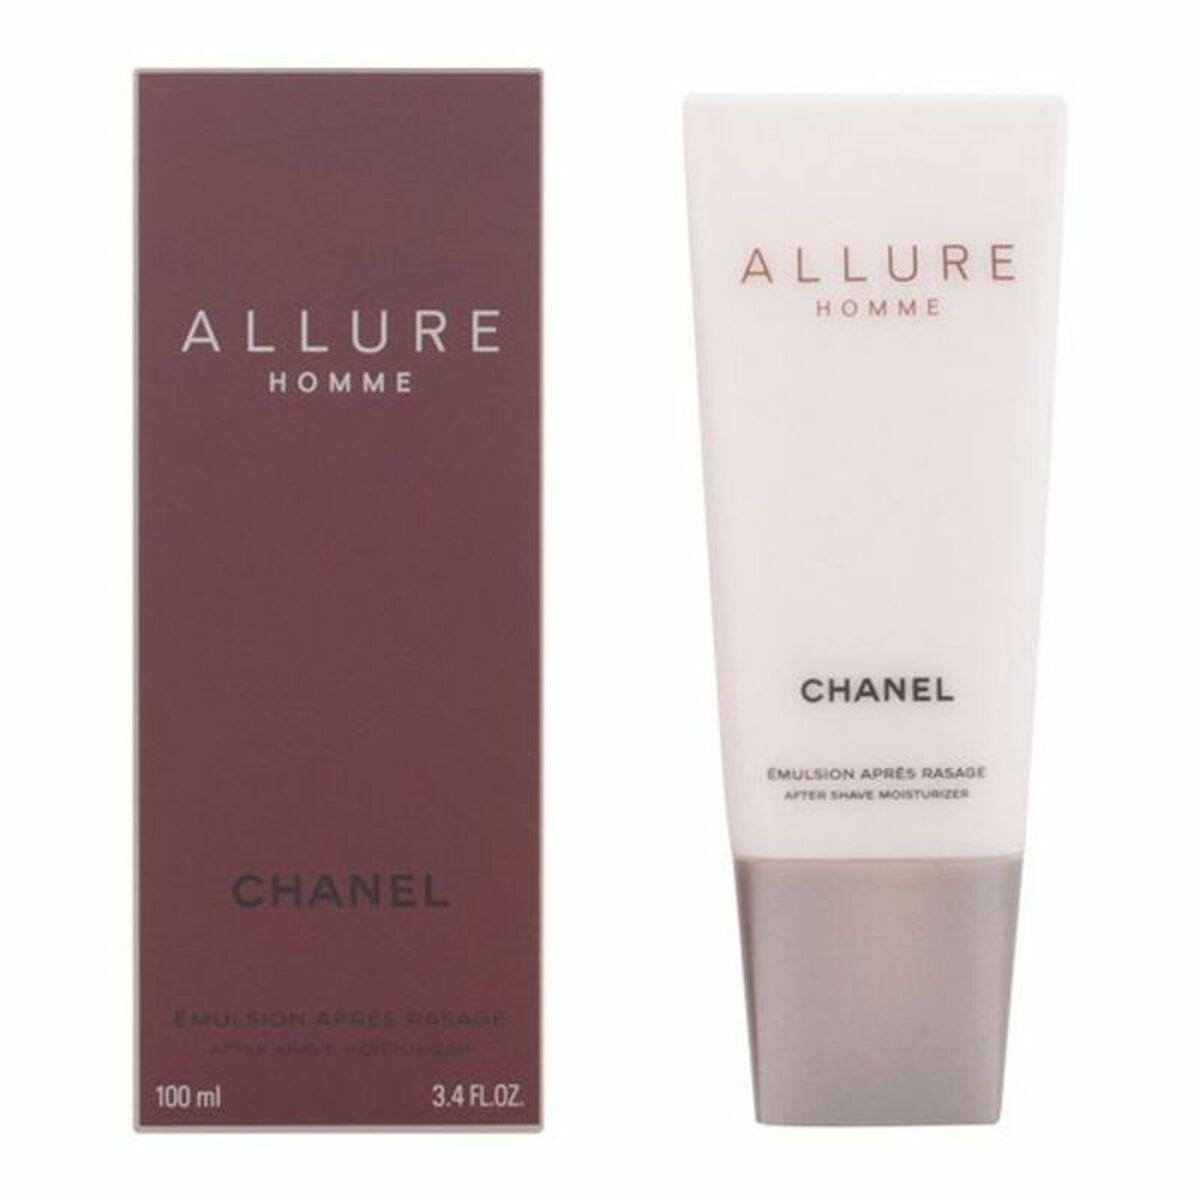 After Shave Balm Allure Homme Chanel 148637 (100 ml)